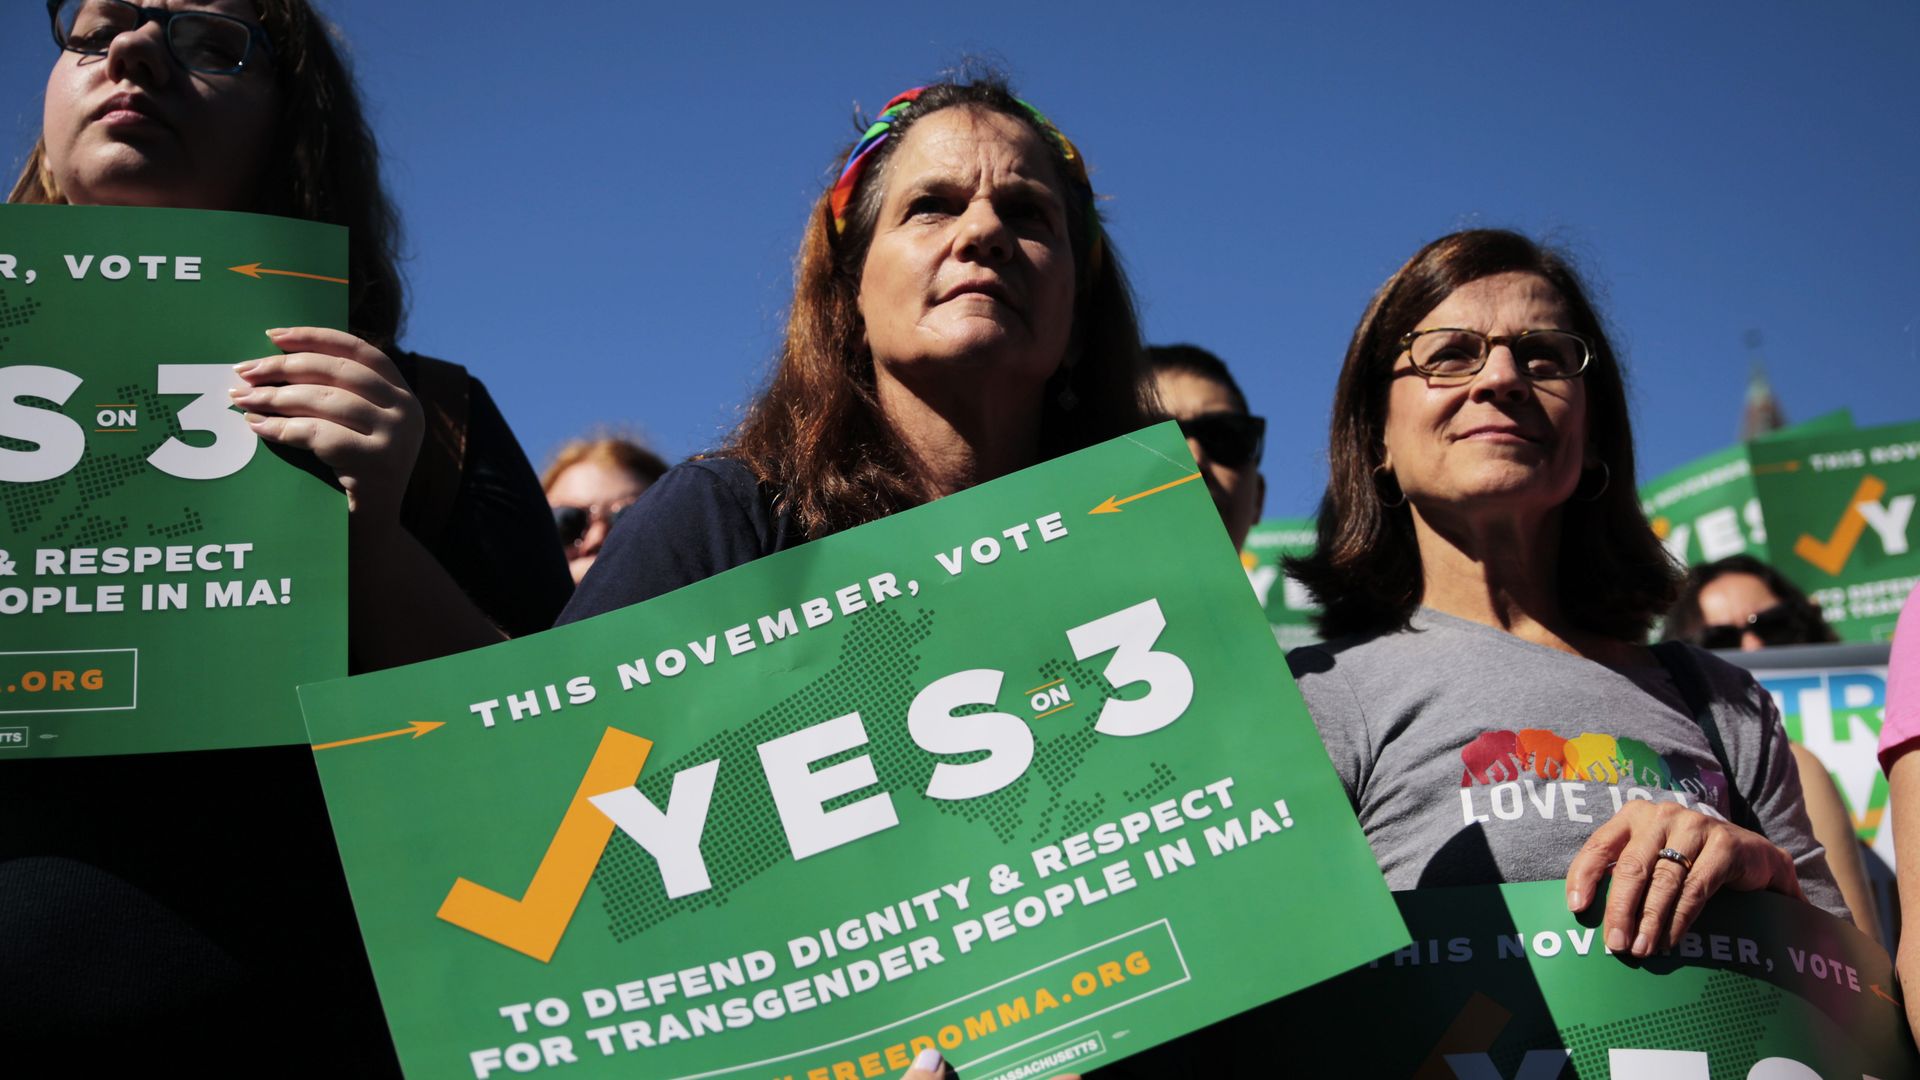 Women hold up signs that say "Yes on 3"